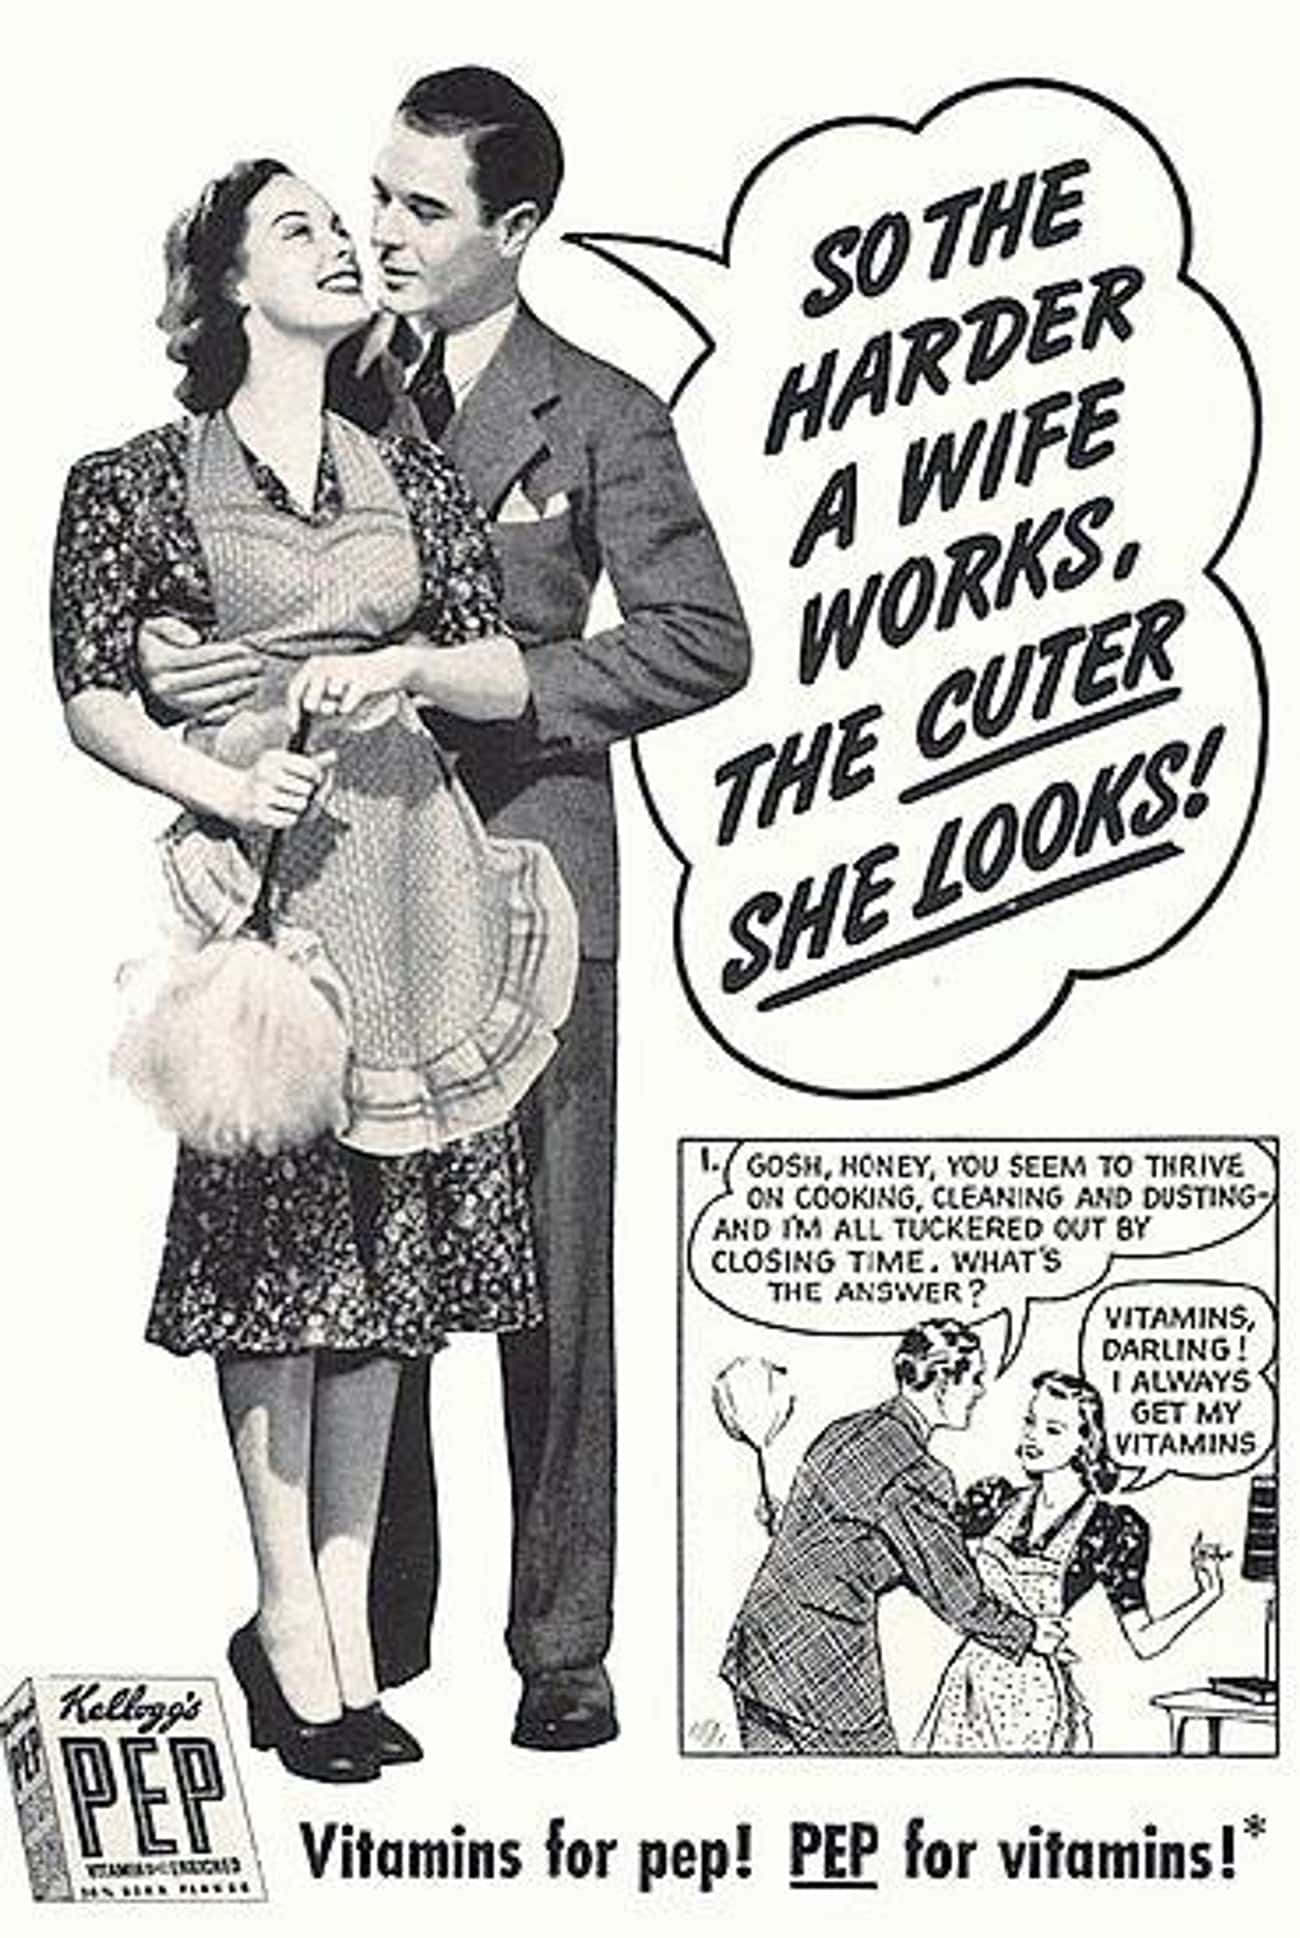 'So The Harder A Wife Works, The Cuter She Looks'